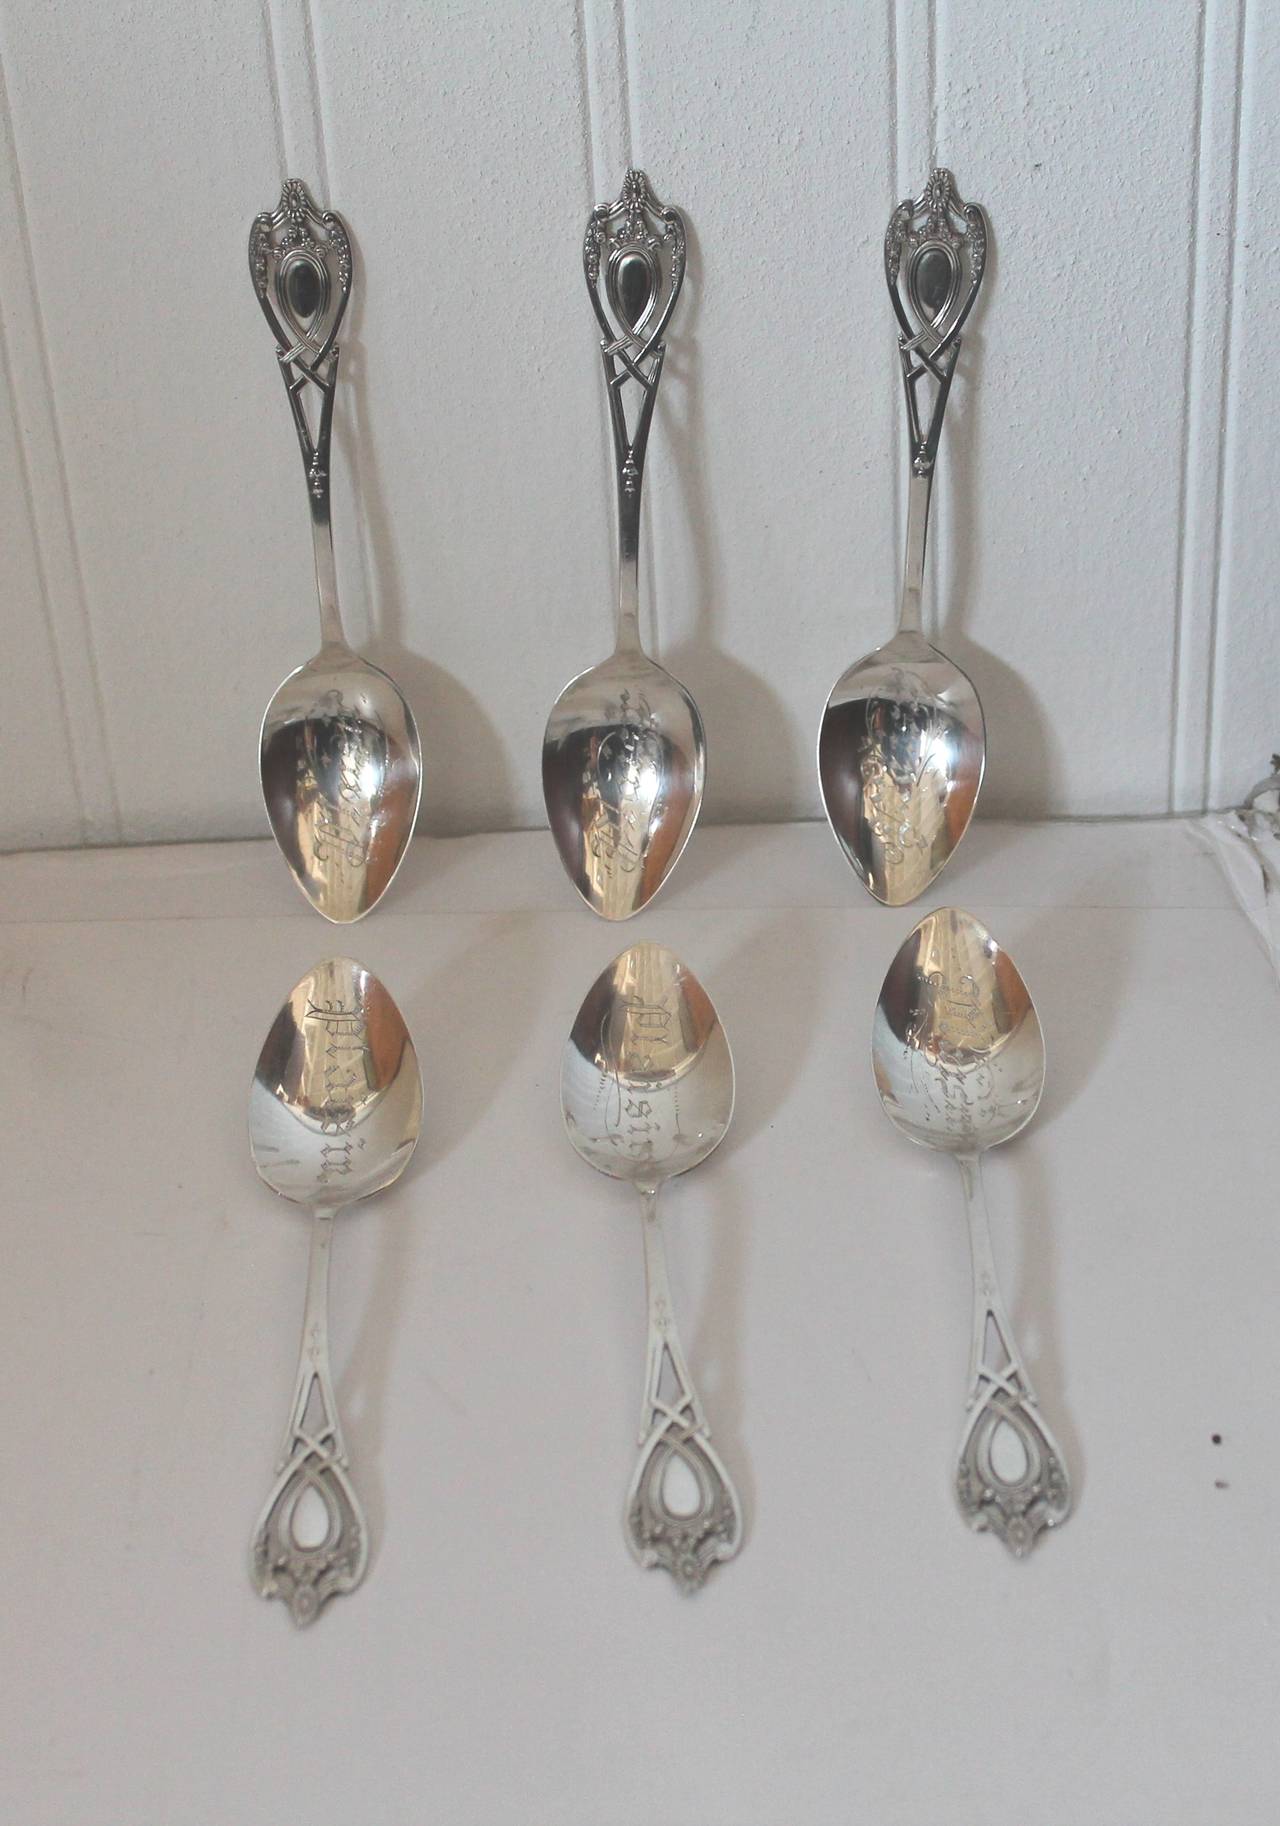 Amazing set of ornate sterling silver tea spoons. They are all marked Gorham sterling and pristine condition.